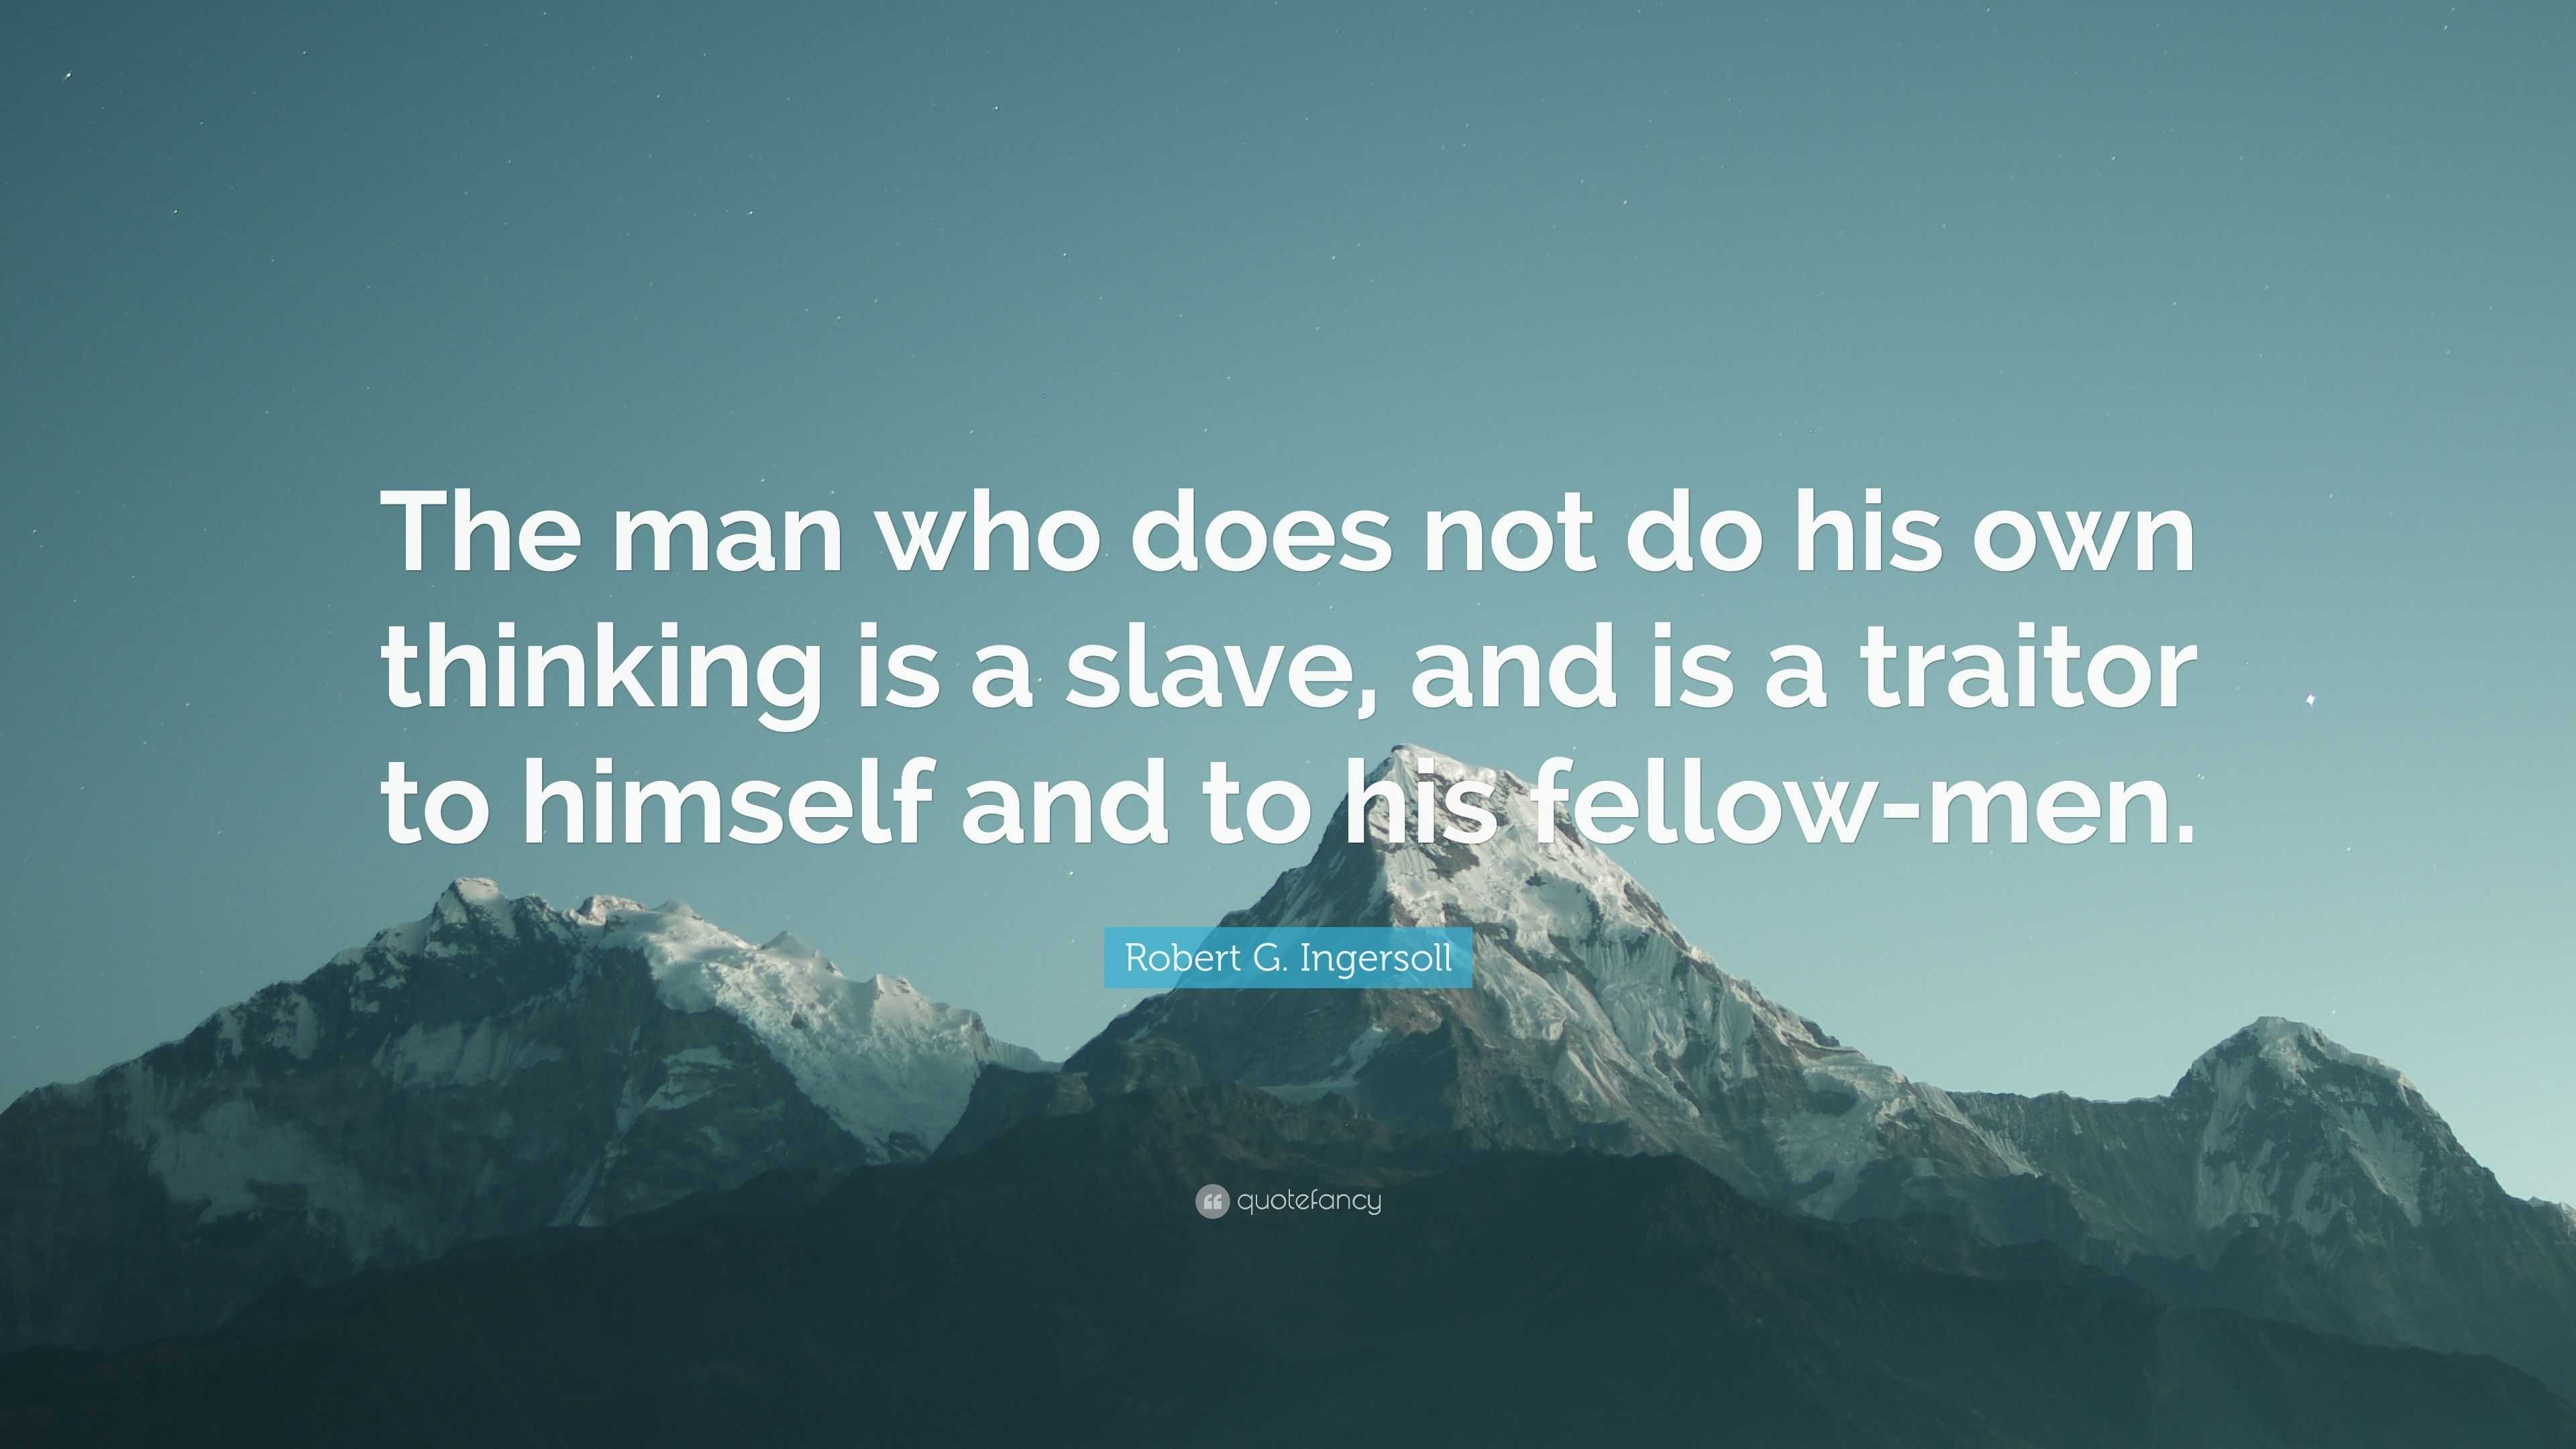 Robert G. Ingersoll Quote: “The man who does not do his own thinking is ...